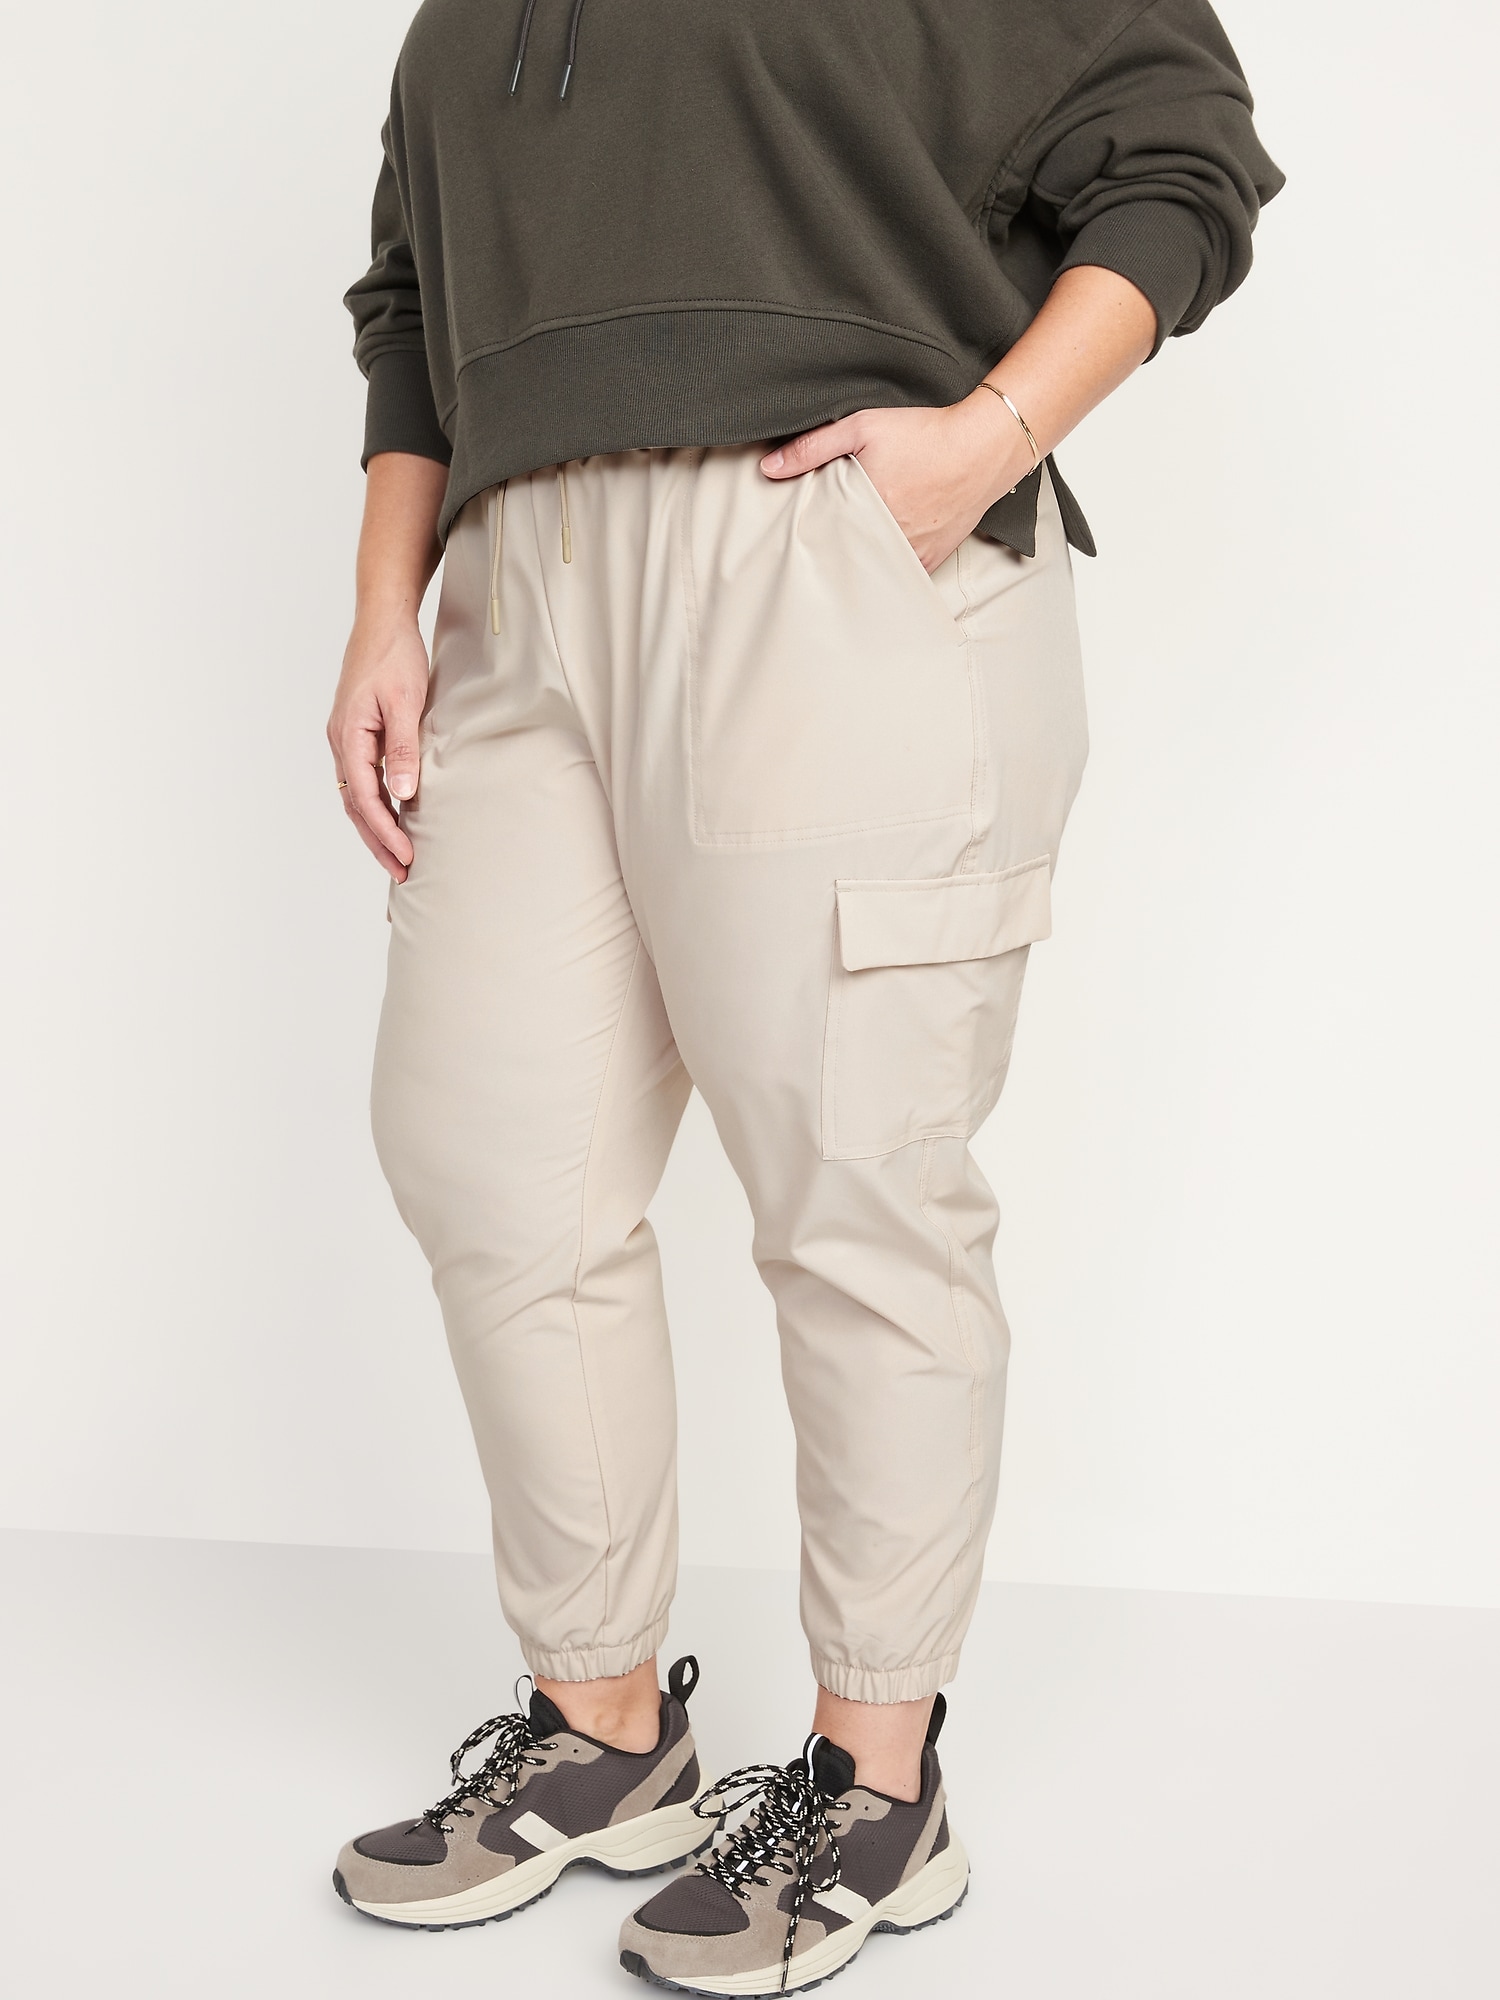 High Star Khaki Relaxed Fit Jogger Pants